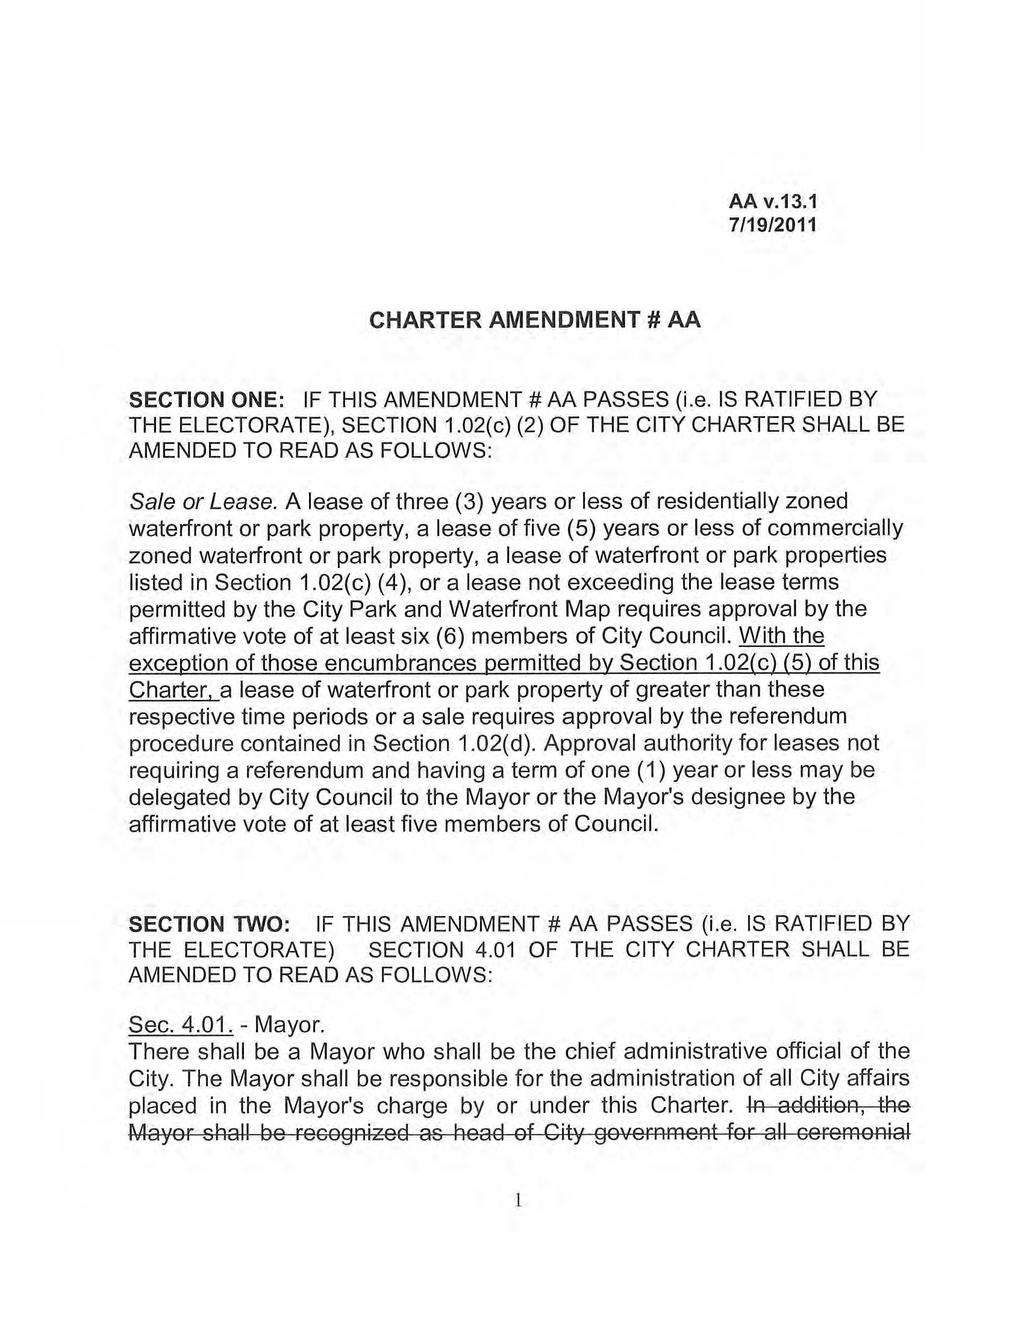 AA v.13.1 7/19/2011 CHARTER AMENDMENT # AA SECTION ONE: IF THIS AMENDMENT# AA PASSES (i.e. IS RATIFIED BY THE ELECTORATE), SECTION 1.02(c) (2) OF THE CITY CHARTER SHALL BE Sale or Lease.